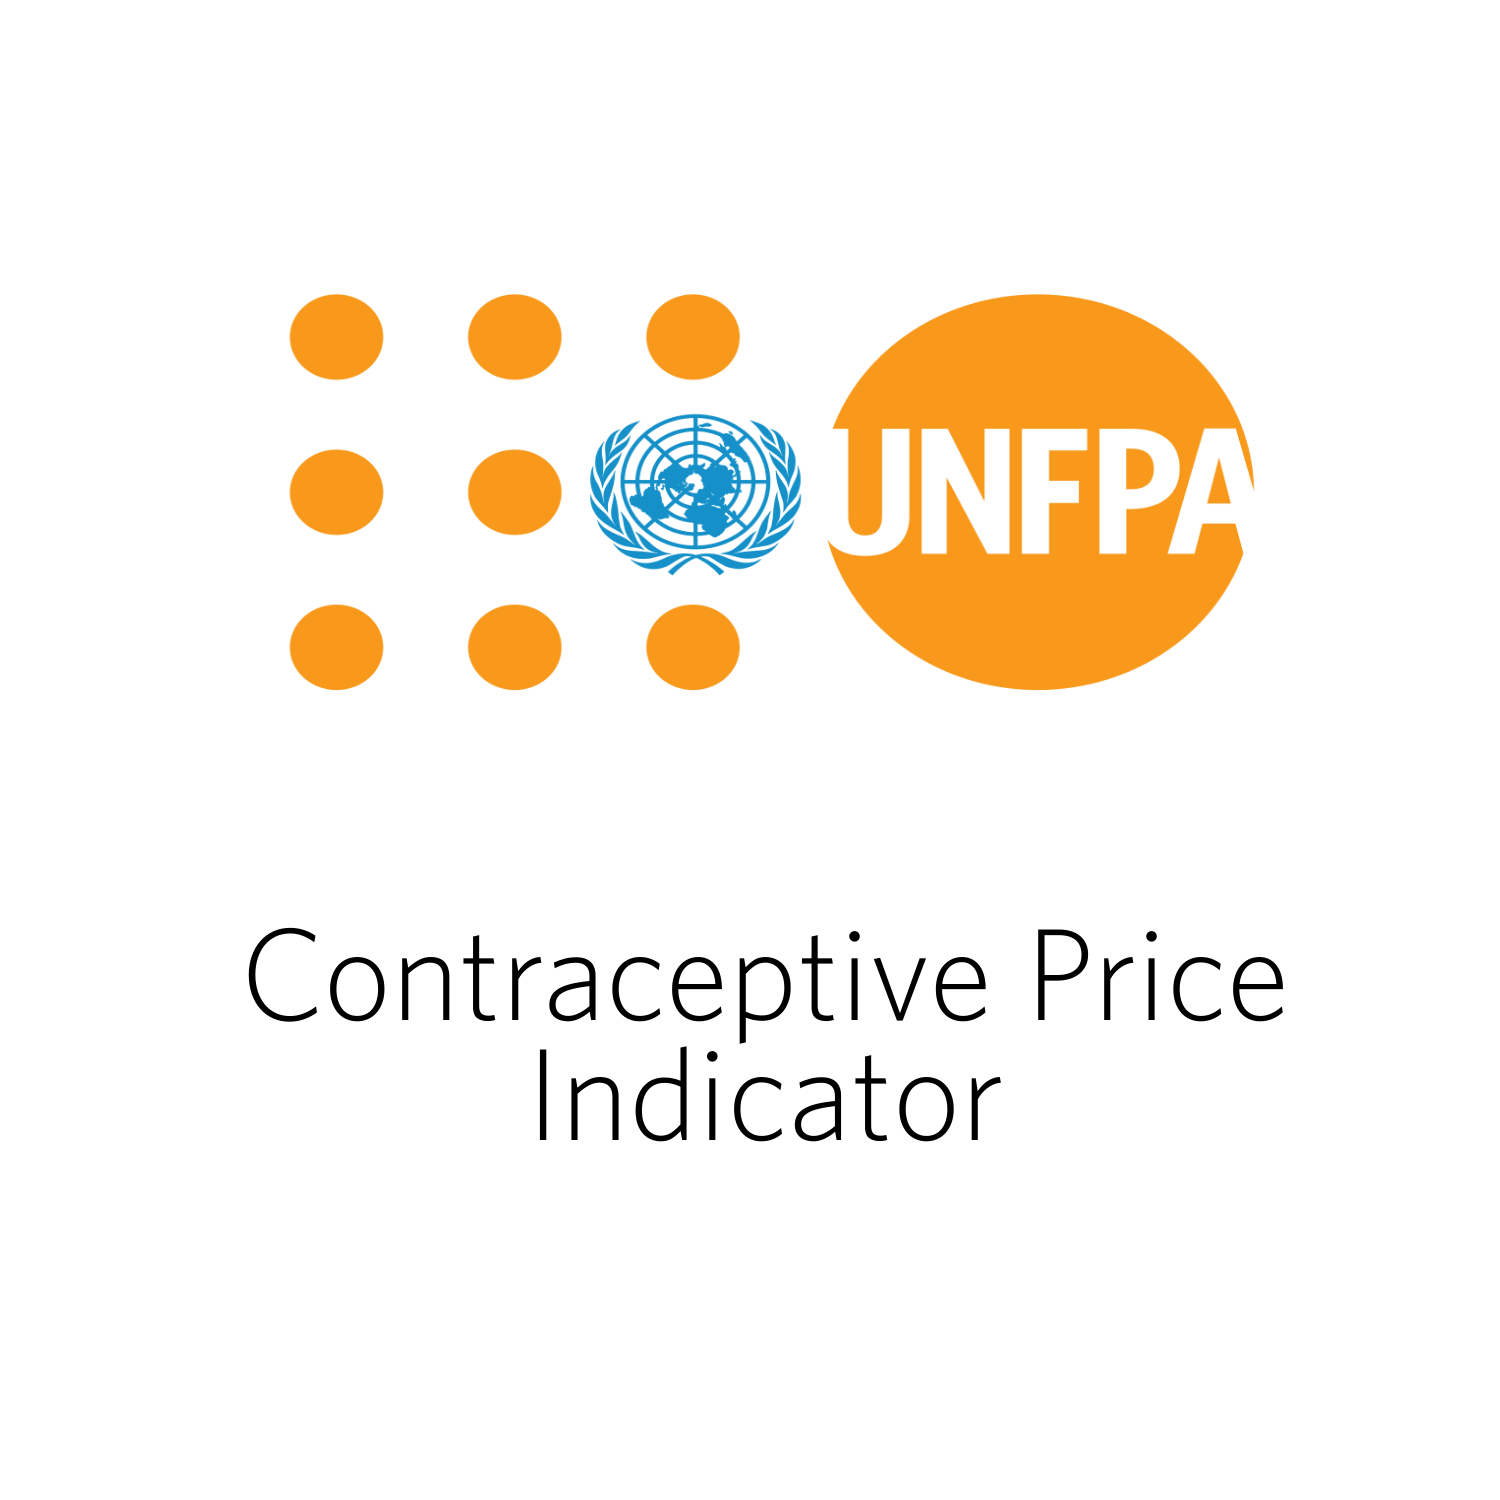 Contraceptive Price Indicator for the year 2018